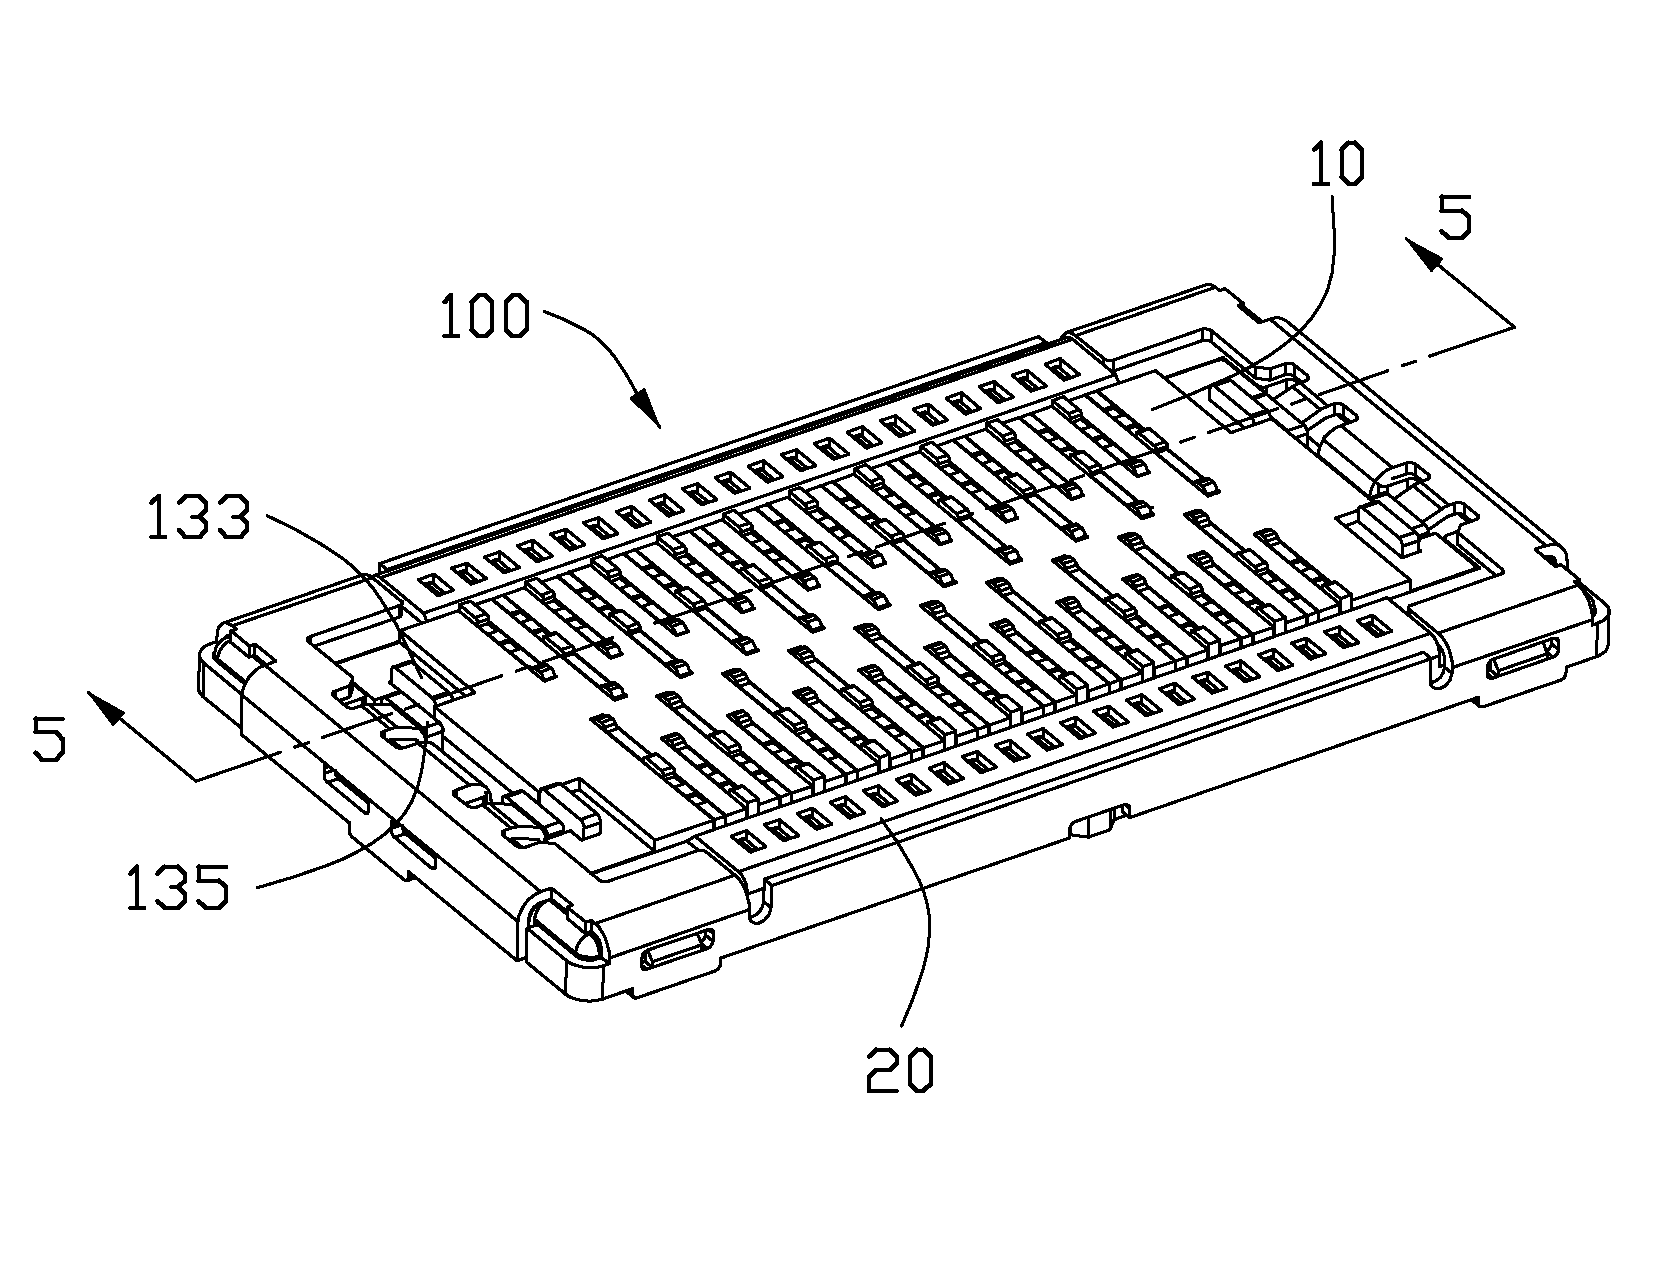 Board to board connector assembly having improved plug and receptacle contacts